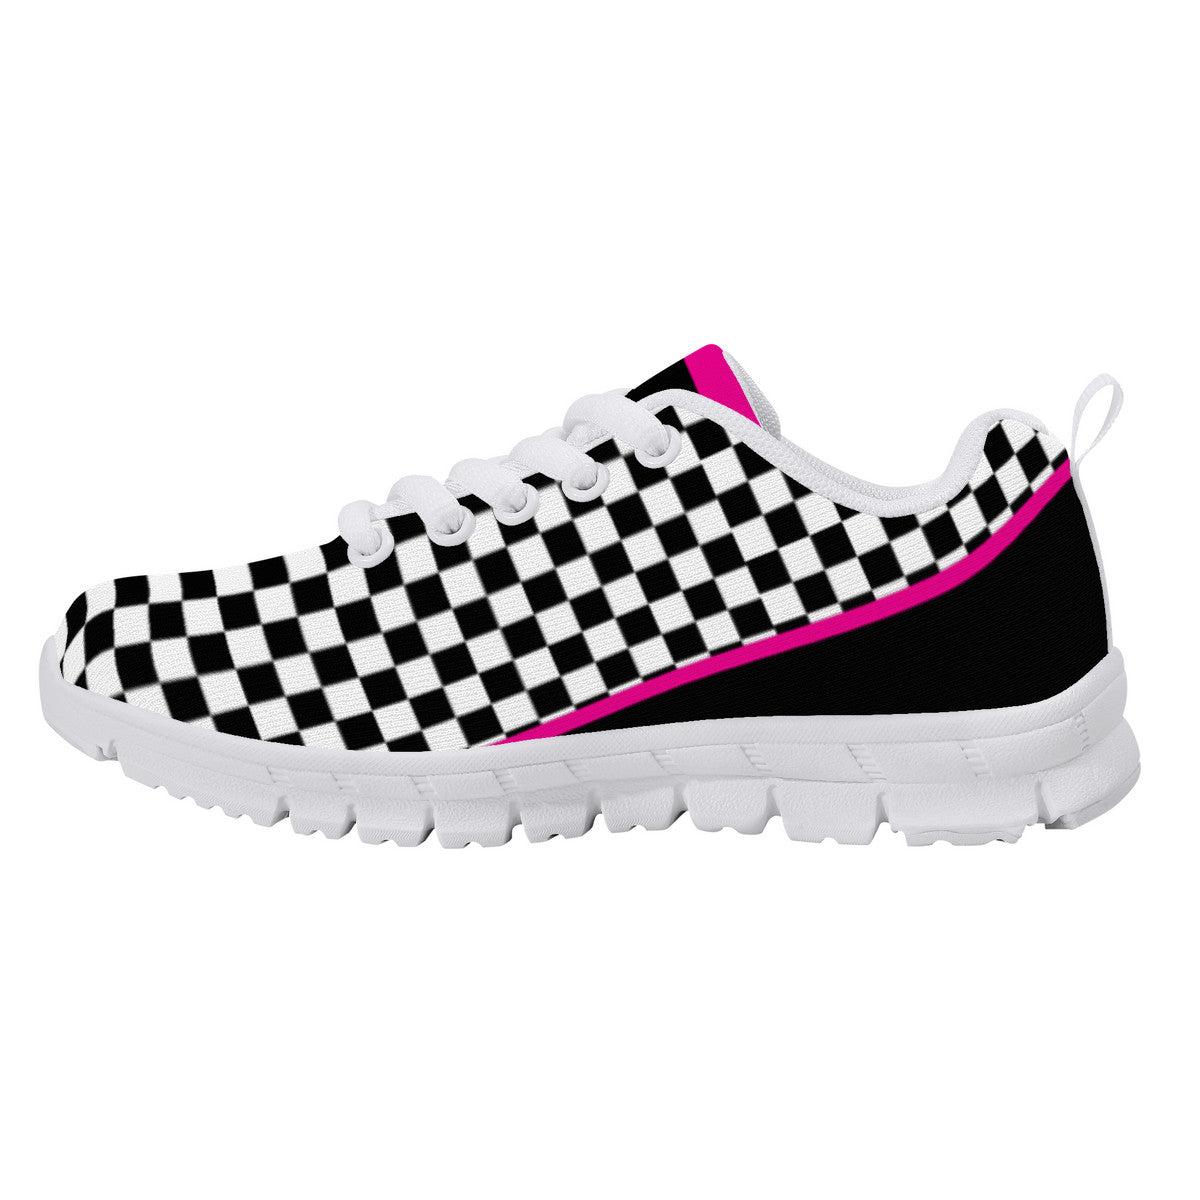 Kids Dance Sneakers - Checkered Black - White - Pink